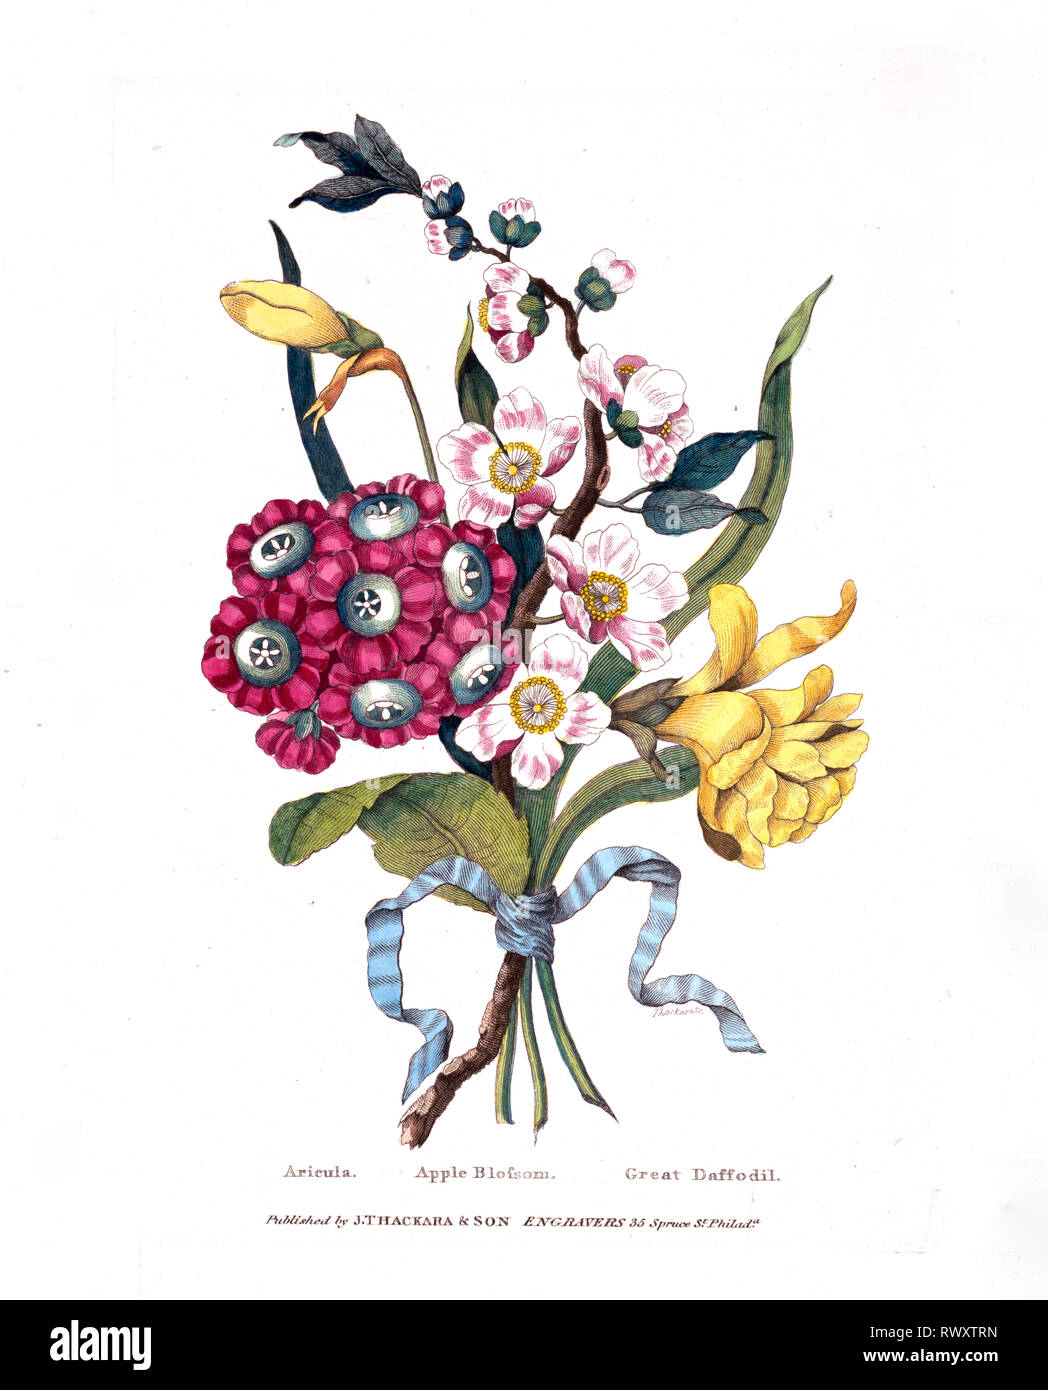 Print shows a bouquet of spring blossoms and flowers tied with a ribbon; shown are a Primula auricula cultivar, a sprig of apple blossoms, and daffodils. Stock Photo